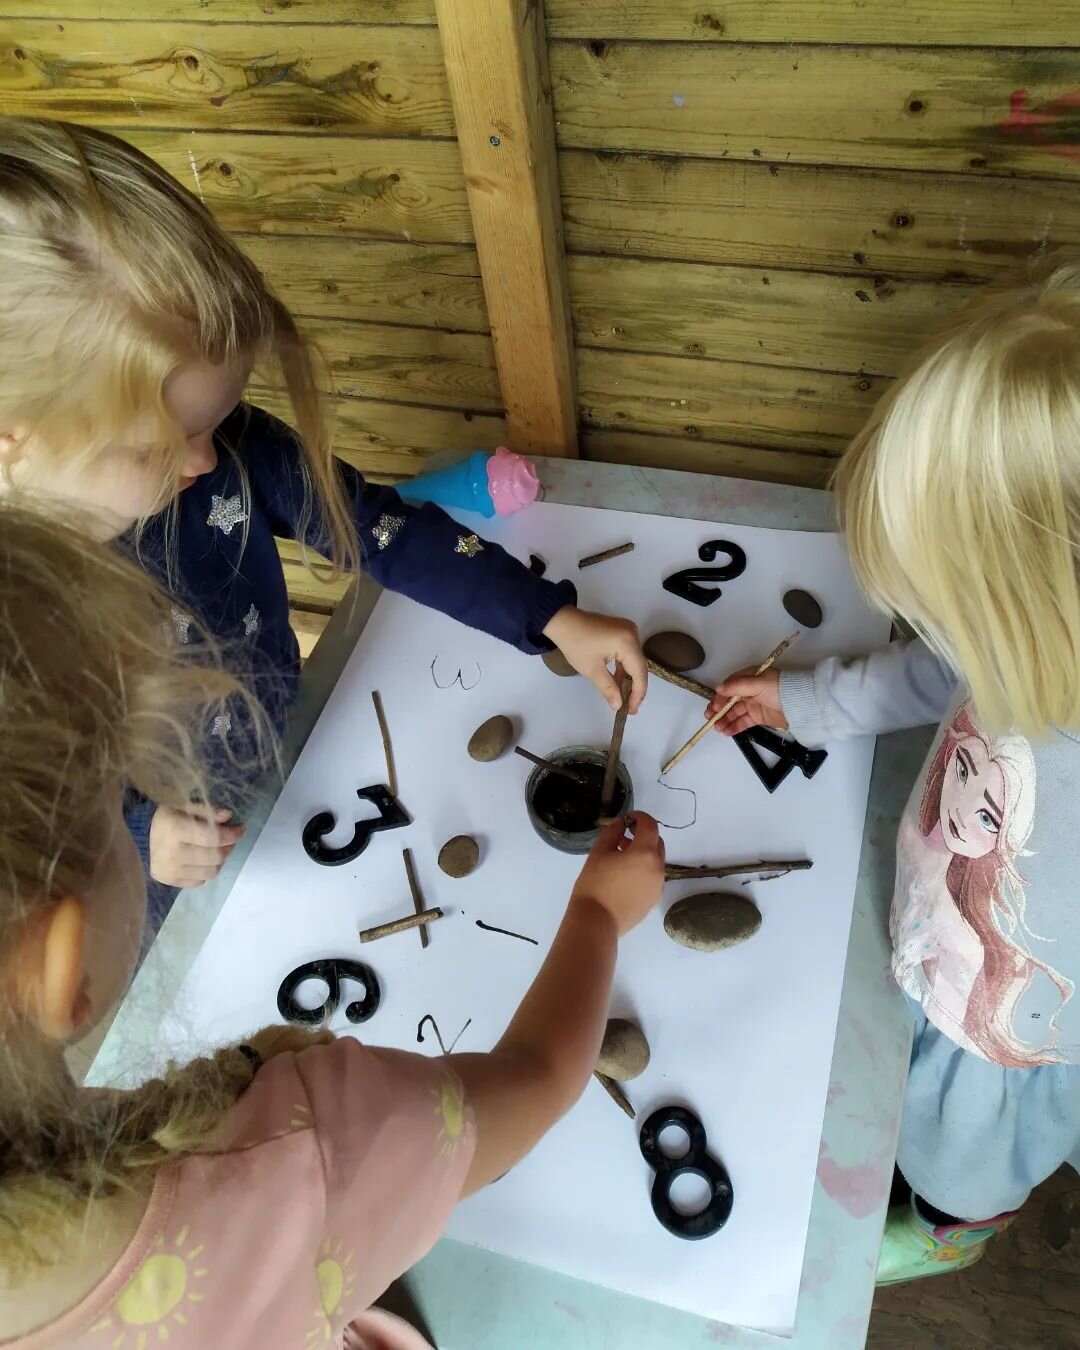 The preschoolers have been practicing their number mark making using natural resources from the garden 🔢🪵🪨

#numbers #mathematics #outdoorlearning #learningthroughnature #naturalresources #curiosity #wonderandawe #mudplay #markmaking #sticksandsto